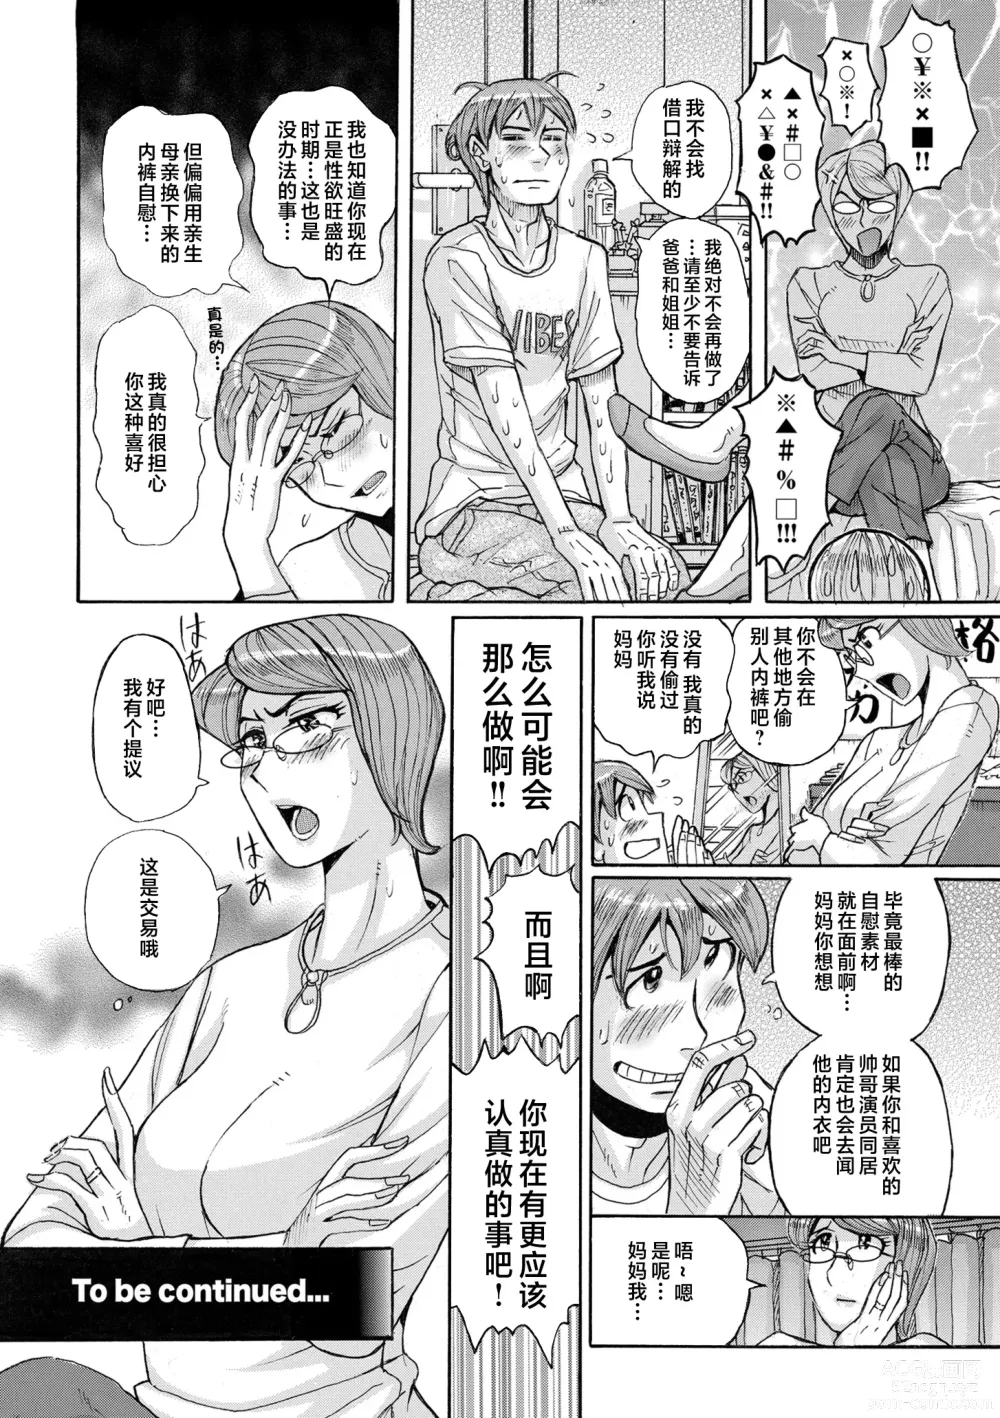 Page 28 of manga Mother’s Care Service How to ’Wincest’